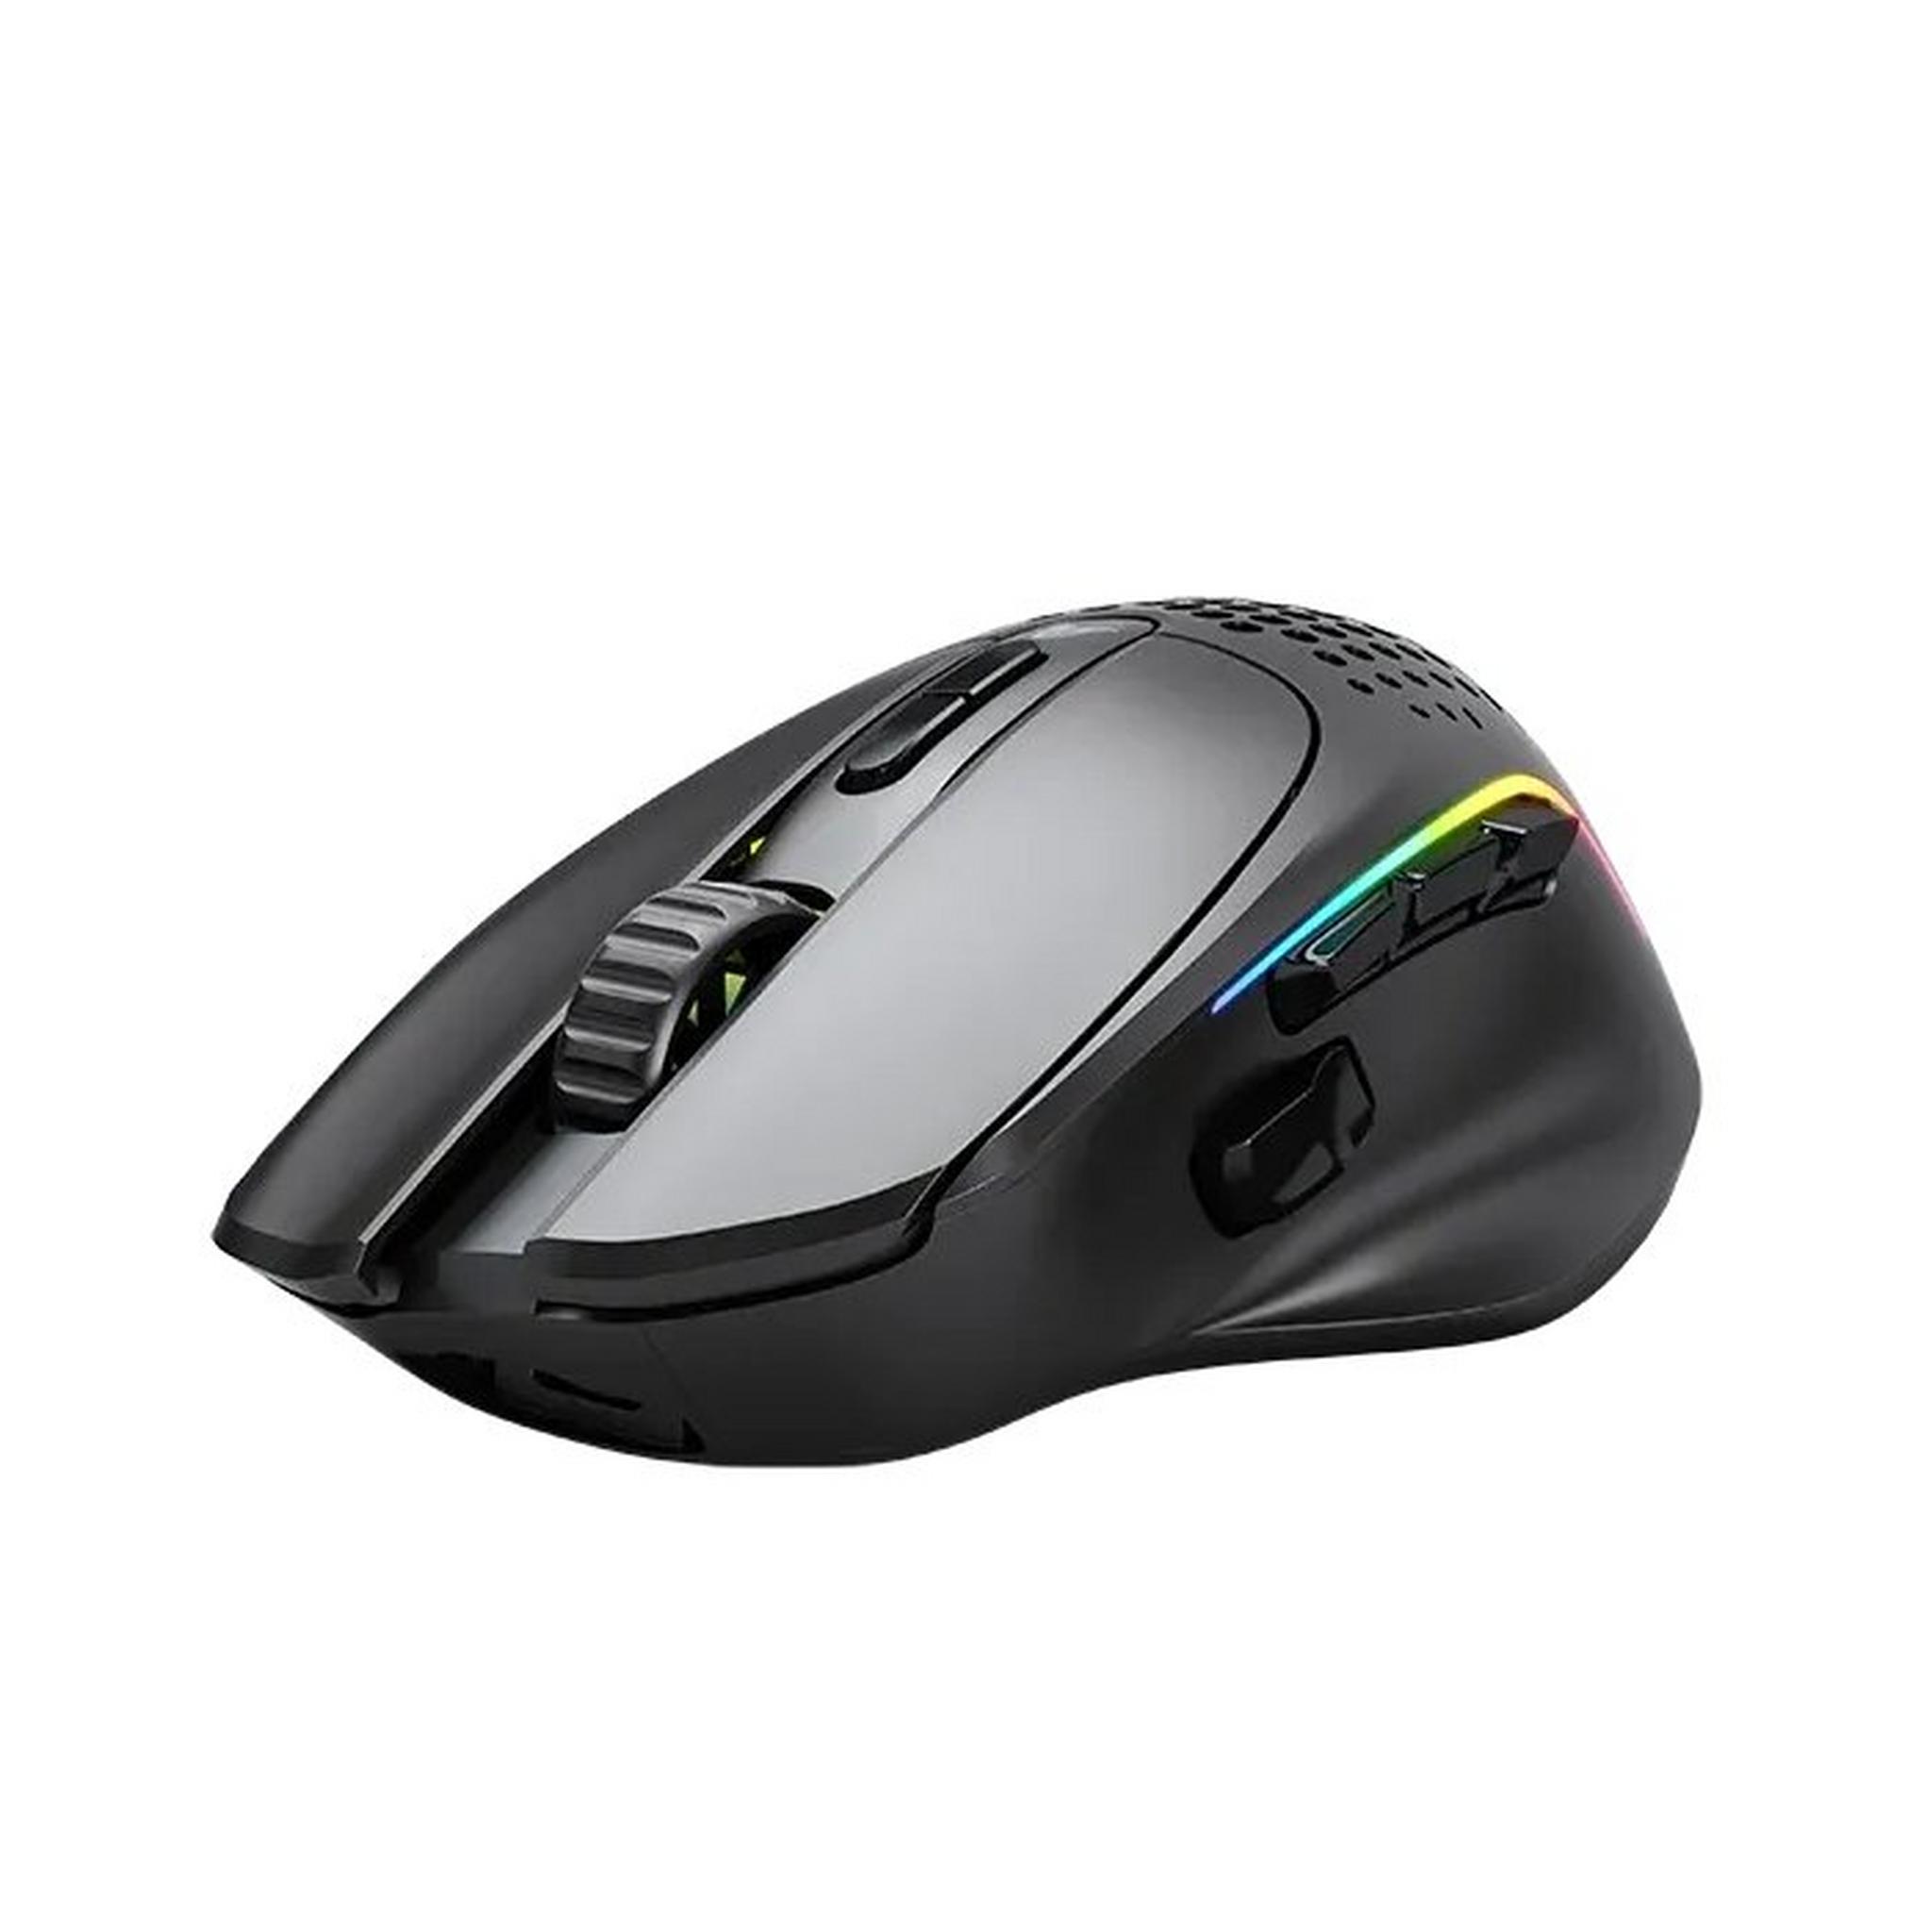 Glorious Model I 2 Wireless Gaming Mouse - Black